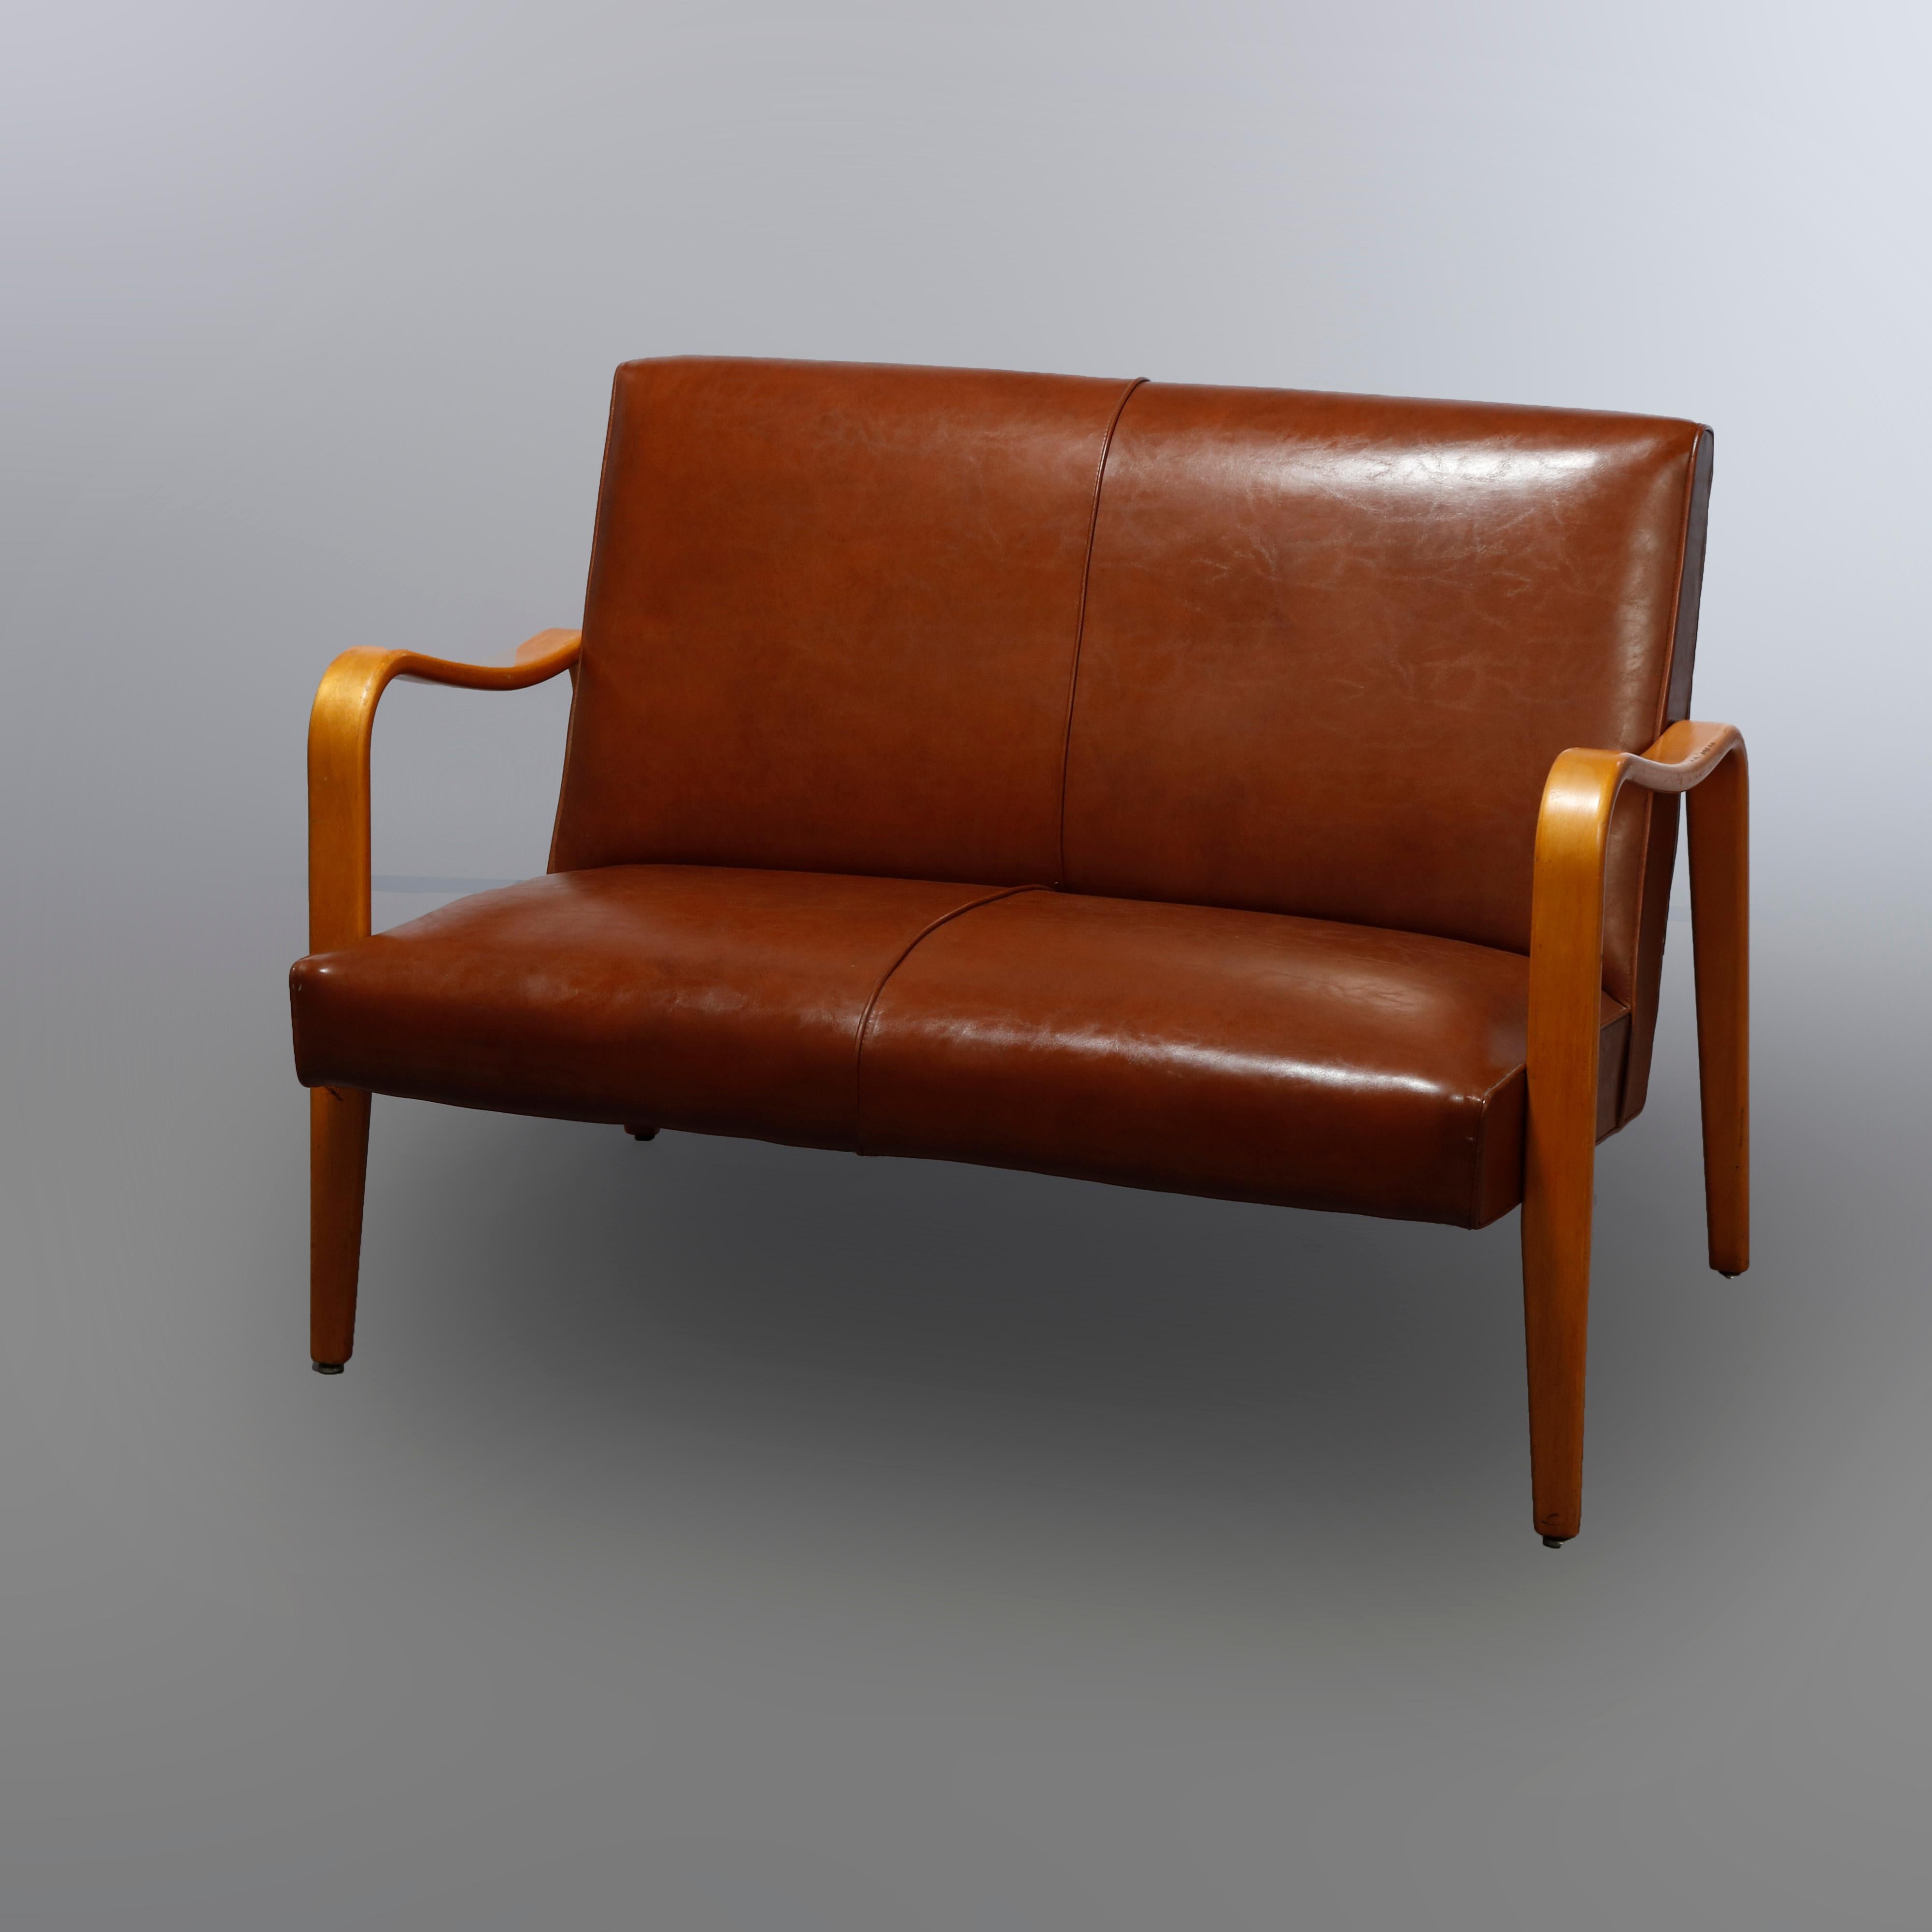 A Mid-Century Modern pair of settees by Thonet offers bent wood laminated frame with leather backs and seats, label as photographed, 20th century

Measures: 32